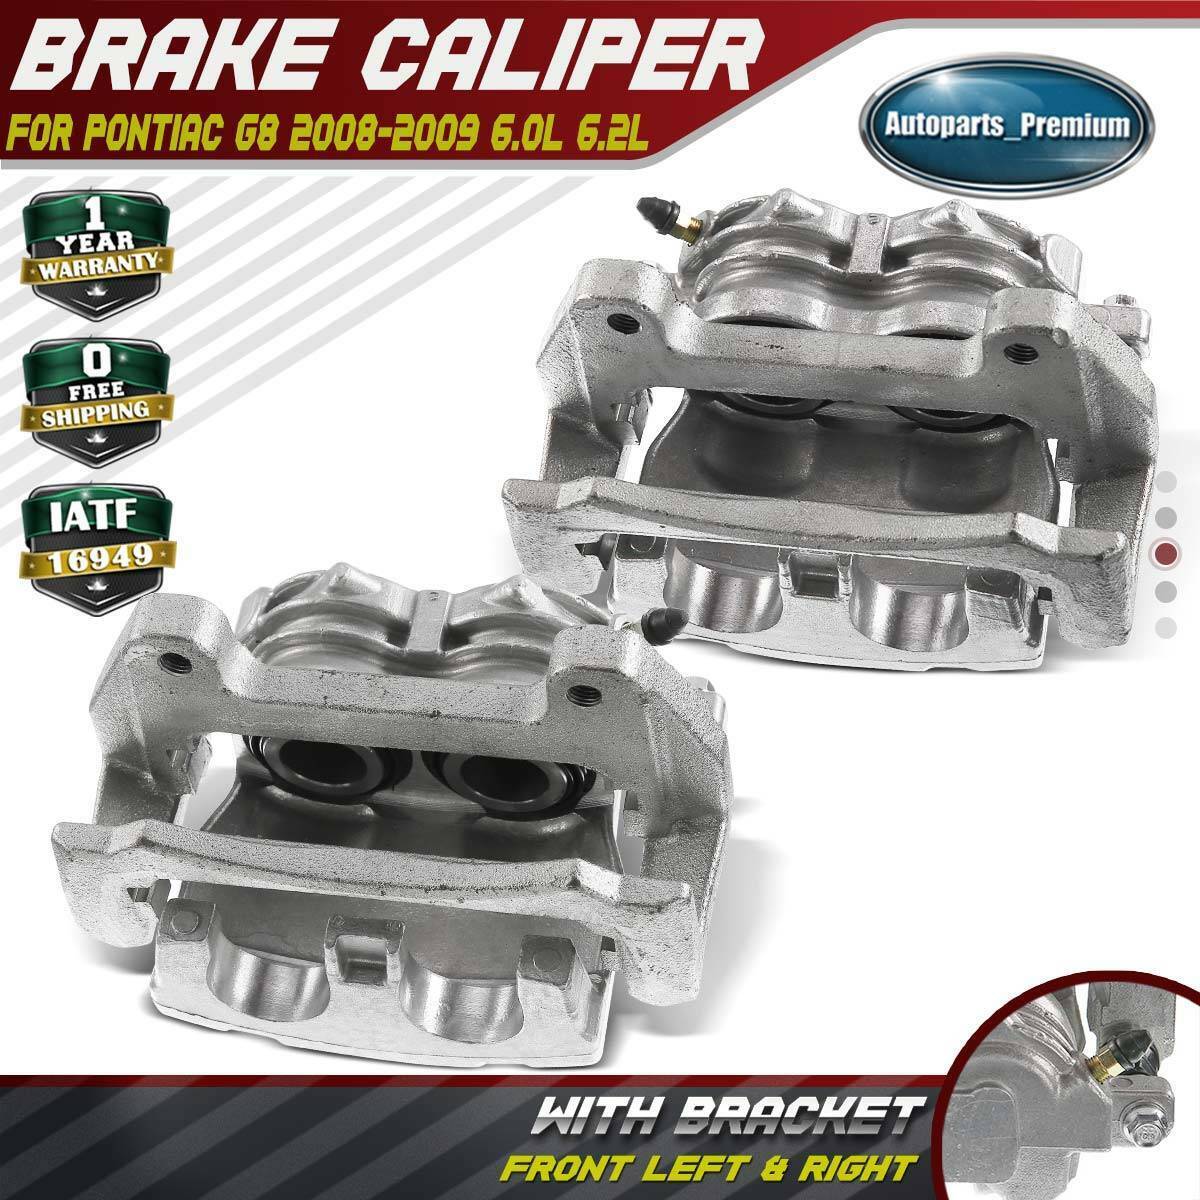 2x Brake Calipers w/ Bracket for Pontiac G8 2008-2009 6.0L 6.2L Front Left&Right